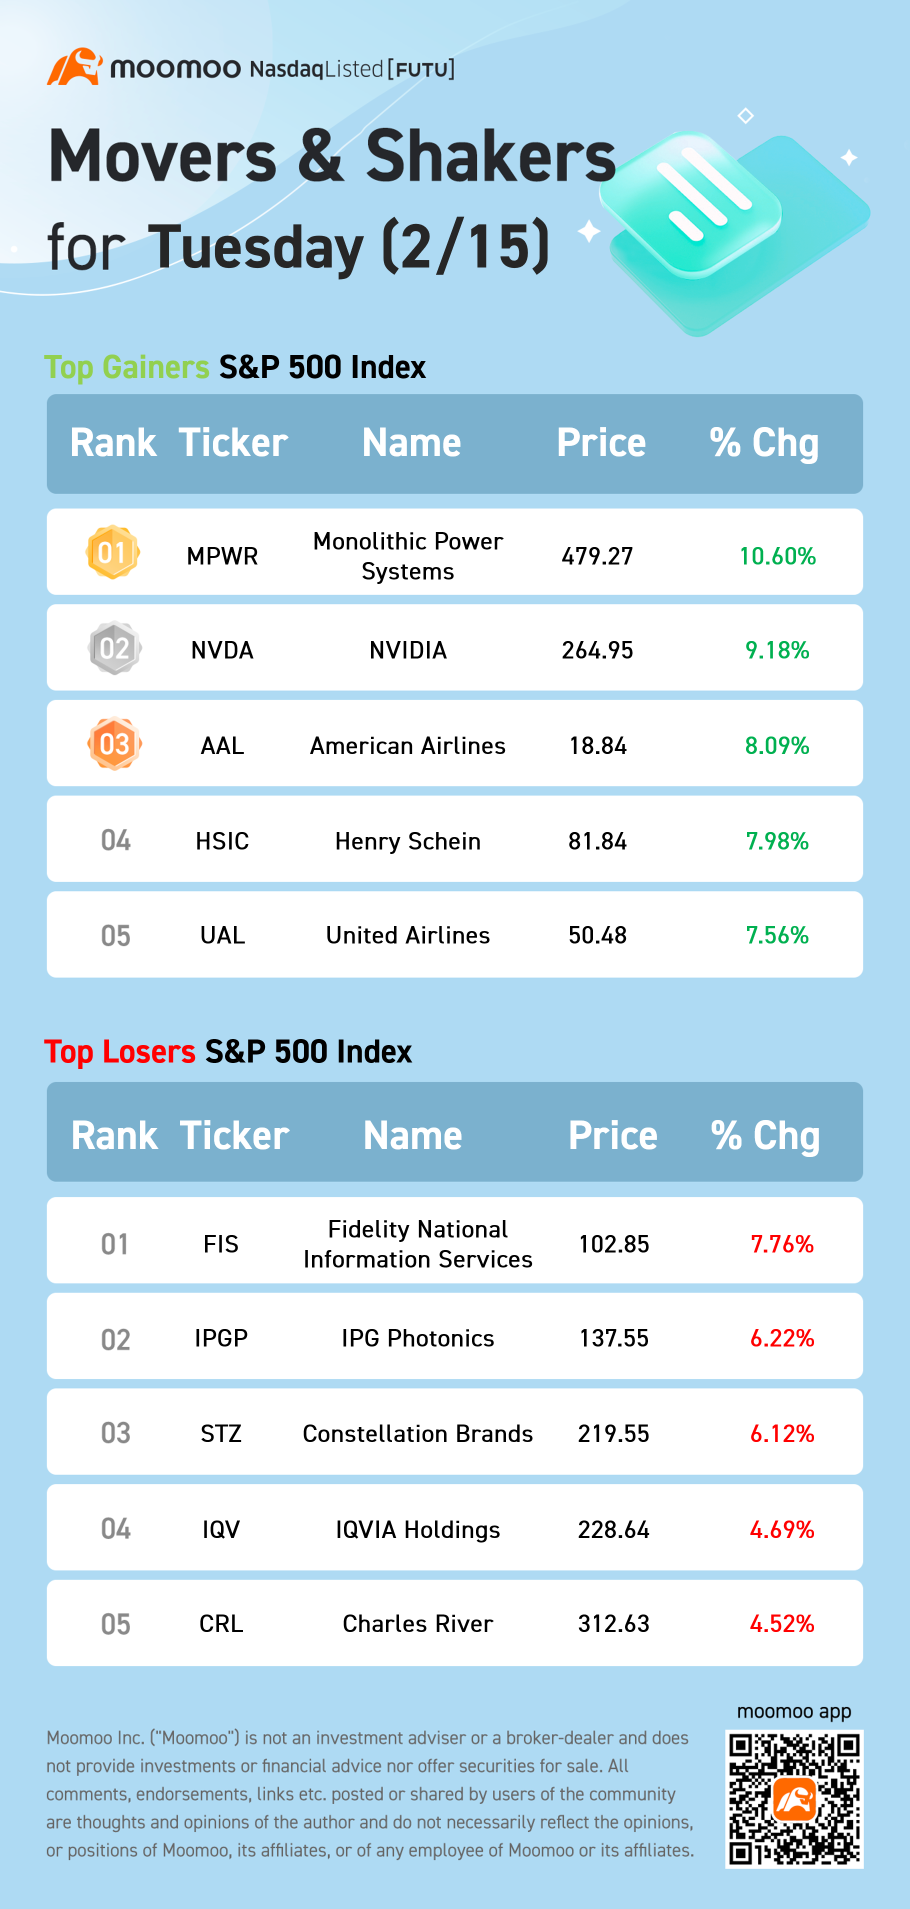 S&P 500 Movers for Tuesday (2/15)